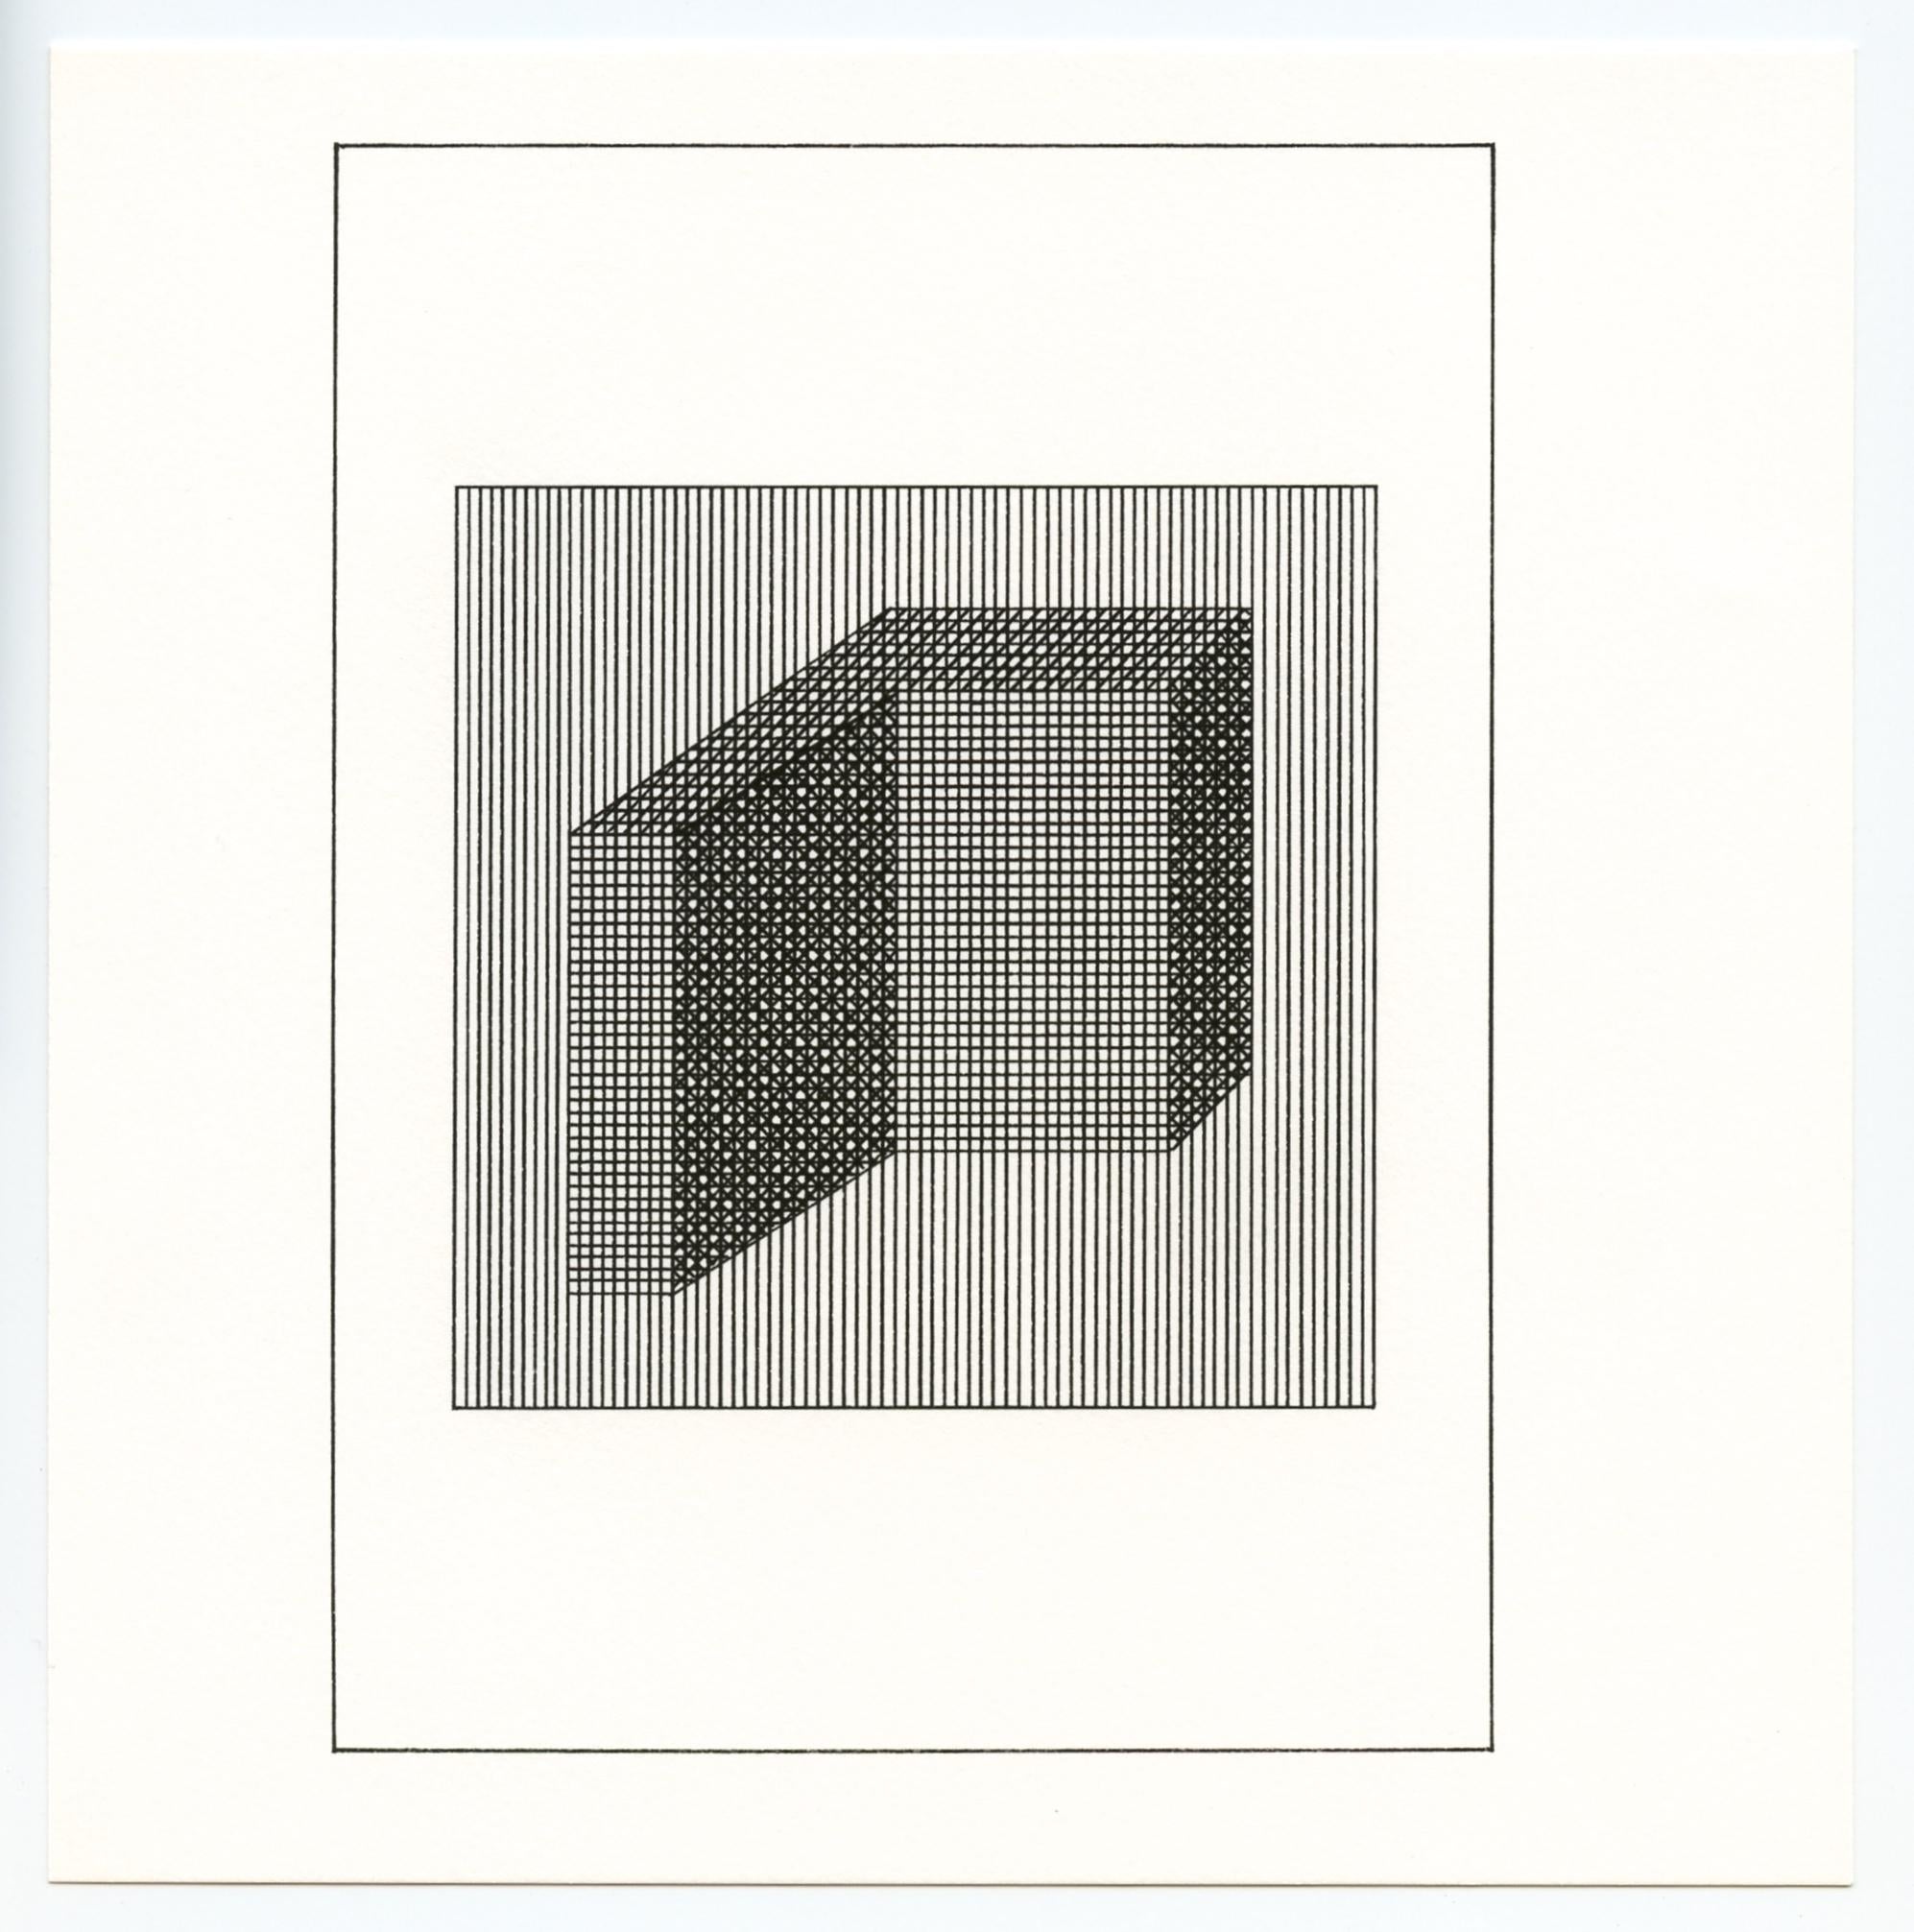 What did Sol LeWitt say about conceptual art?